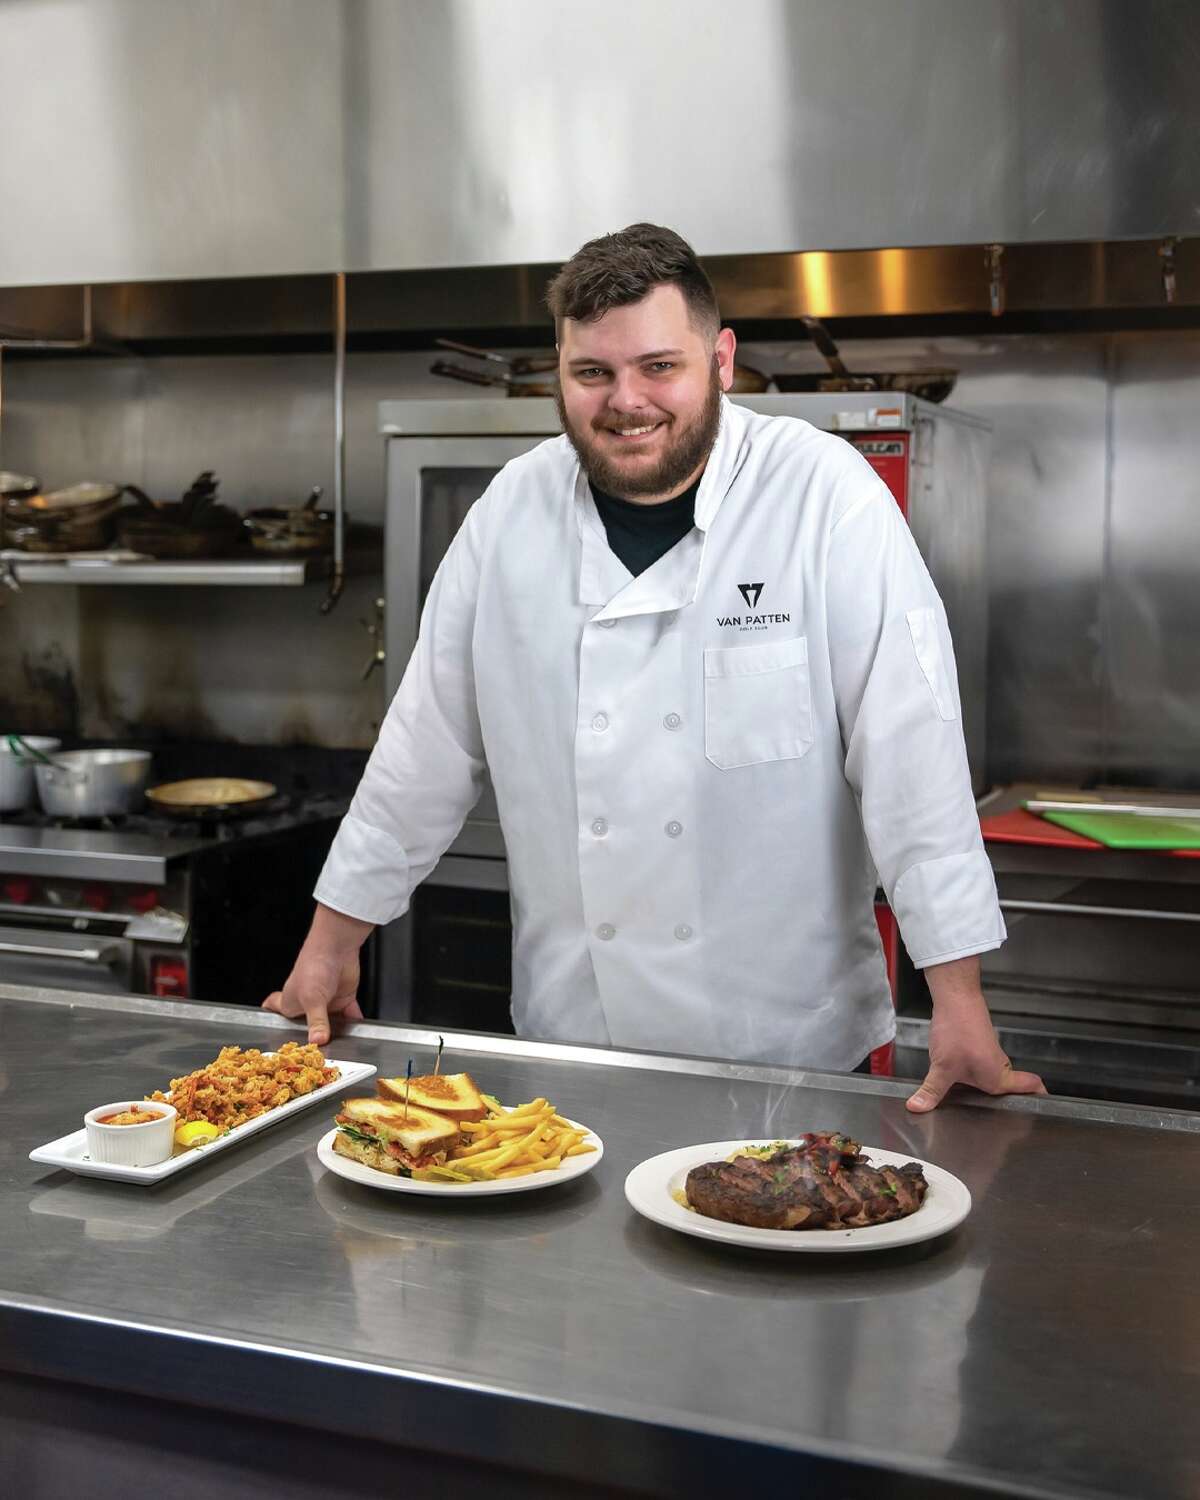 Zach Arsenault is the head chef at the new Cooley Kill Restaurant & Bar at Van Patten Golf Club in the Clifton Park hamlet of Jonesville. The restaurant opens for the 2022 season on April 6, the golf course on April 15.